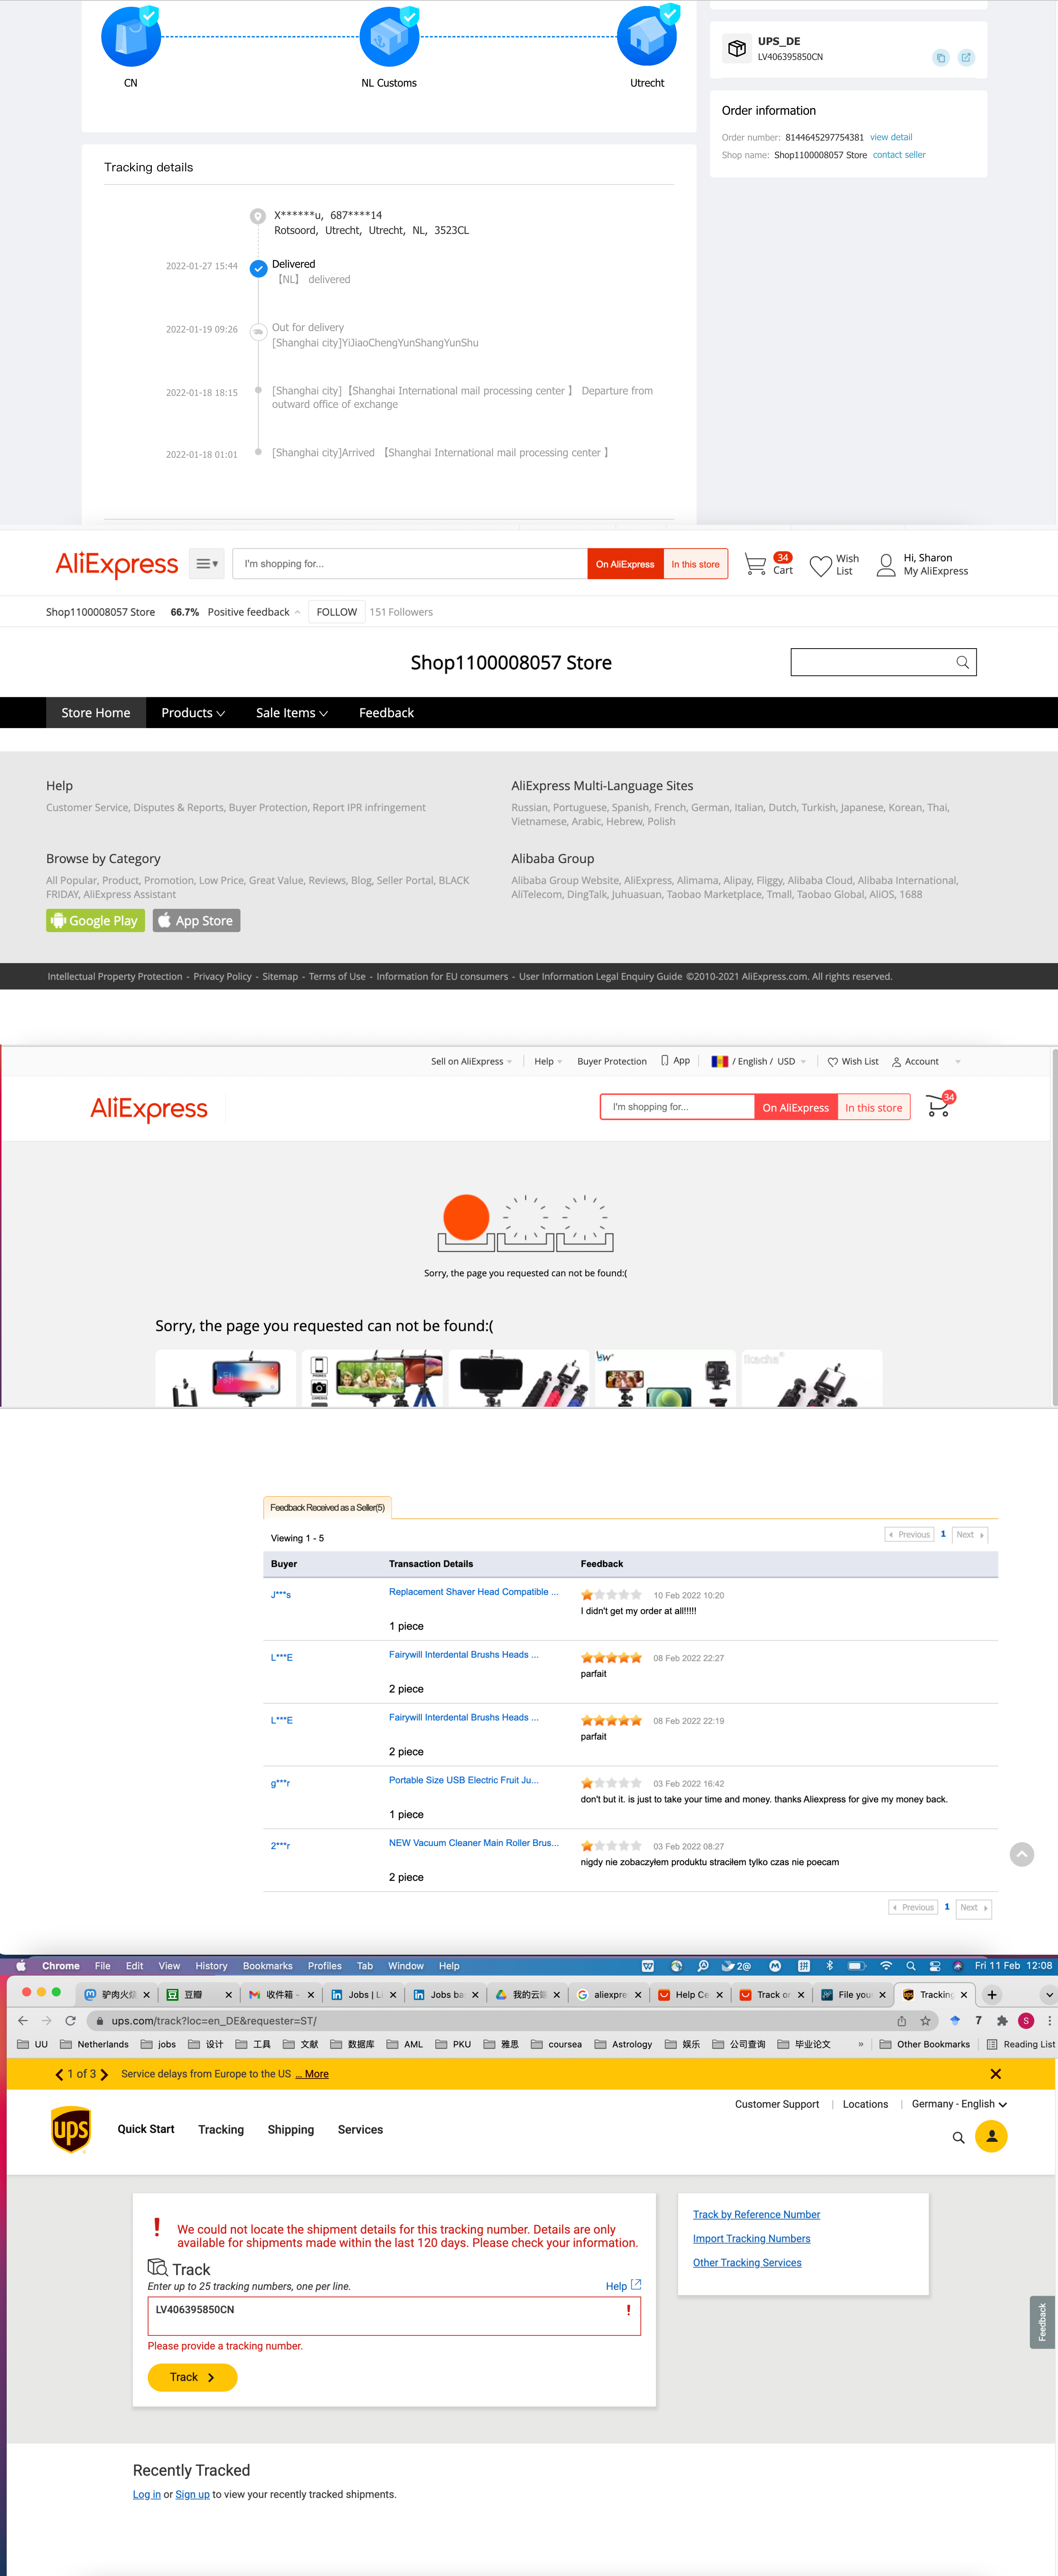 AliExpress complaint Haven't received my package and the seller refused to refund